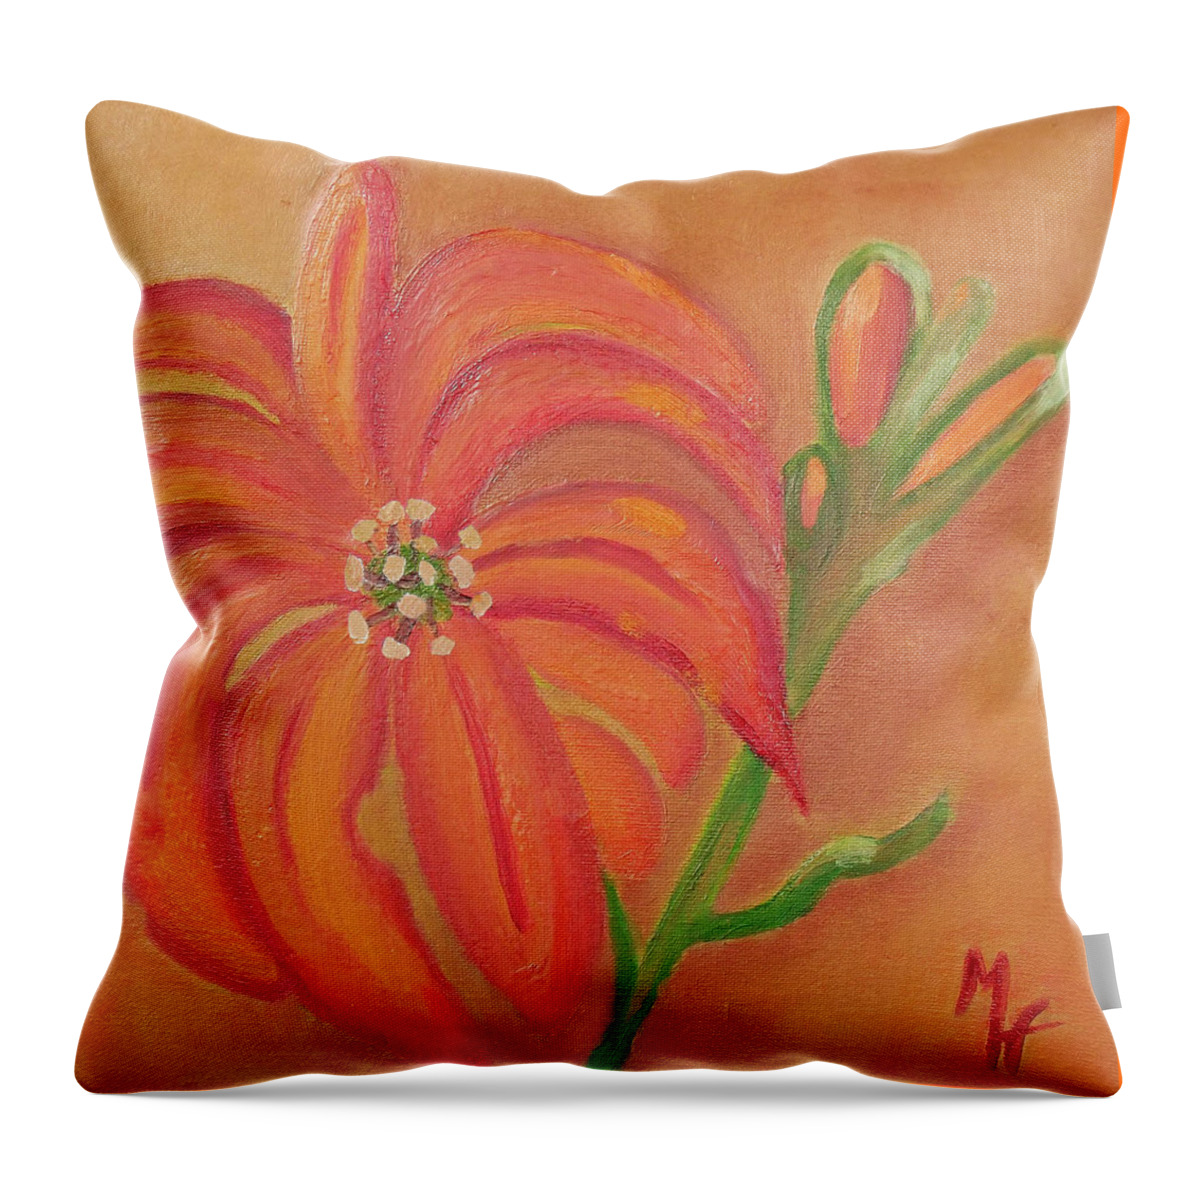 Flower Painting Throw Pillow featuring the painting Double Headed Orange Day Lily by Margaret Harmon